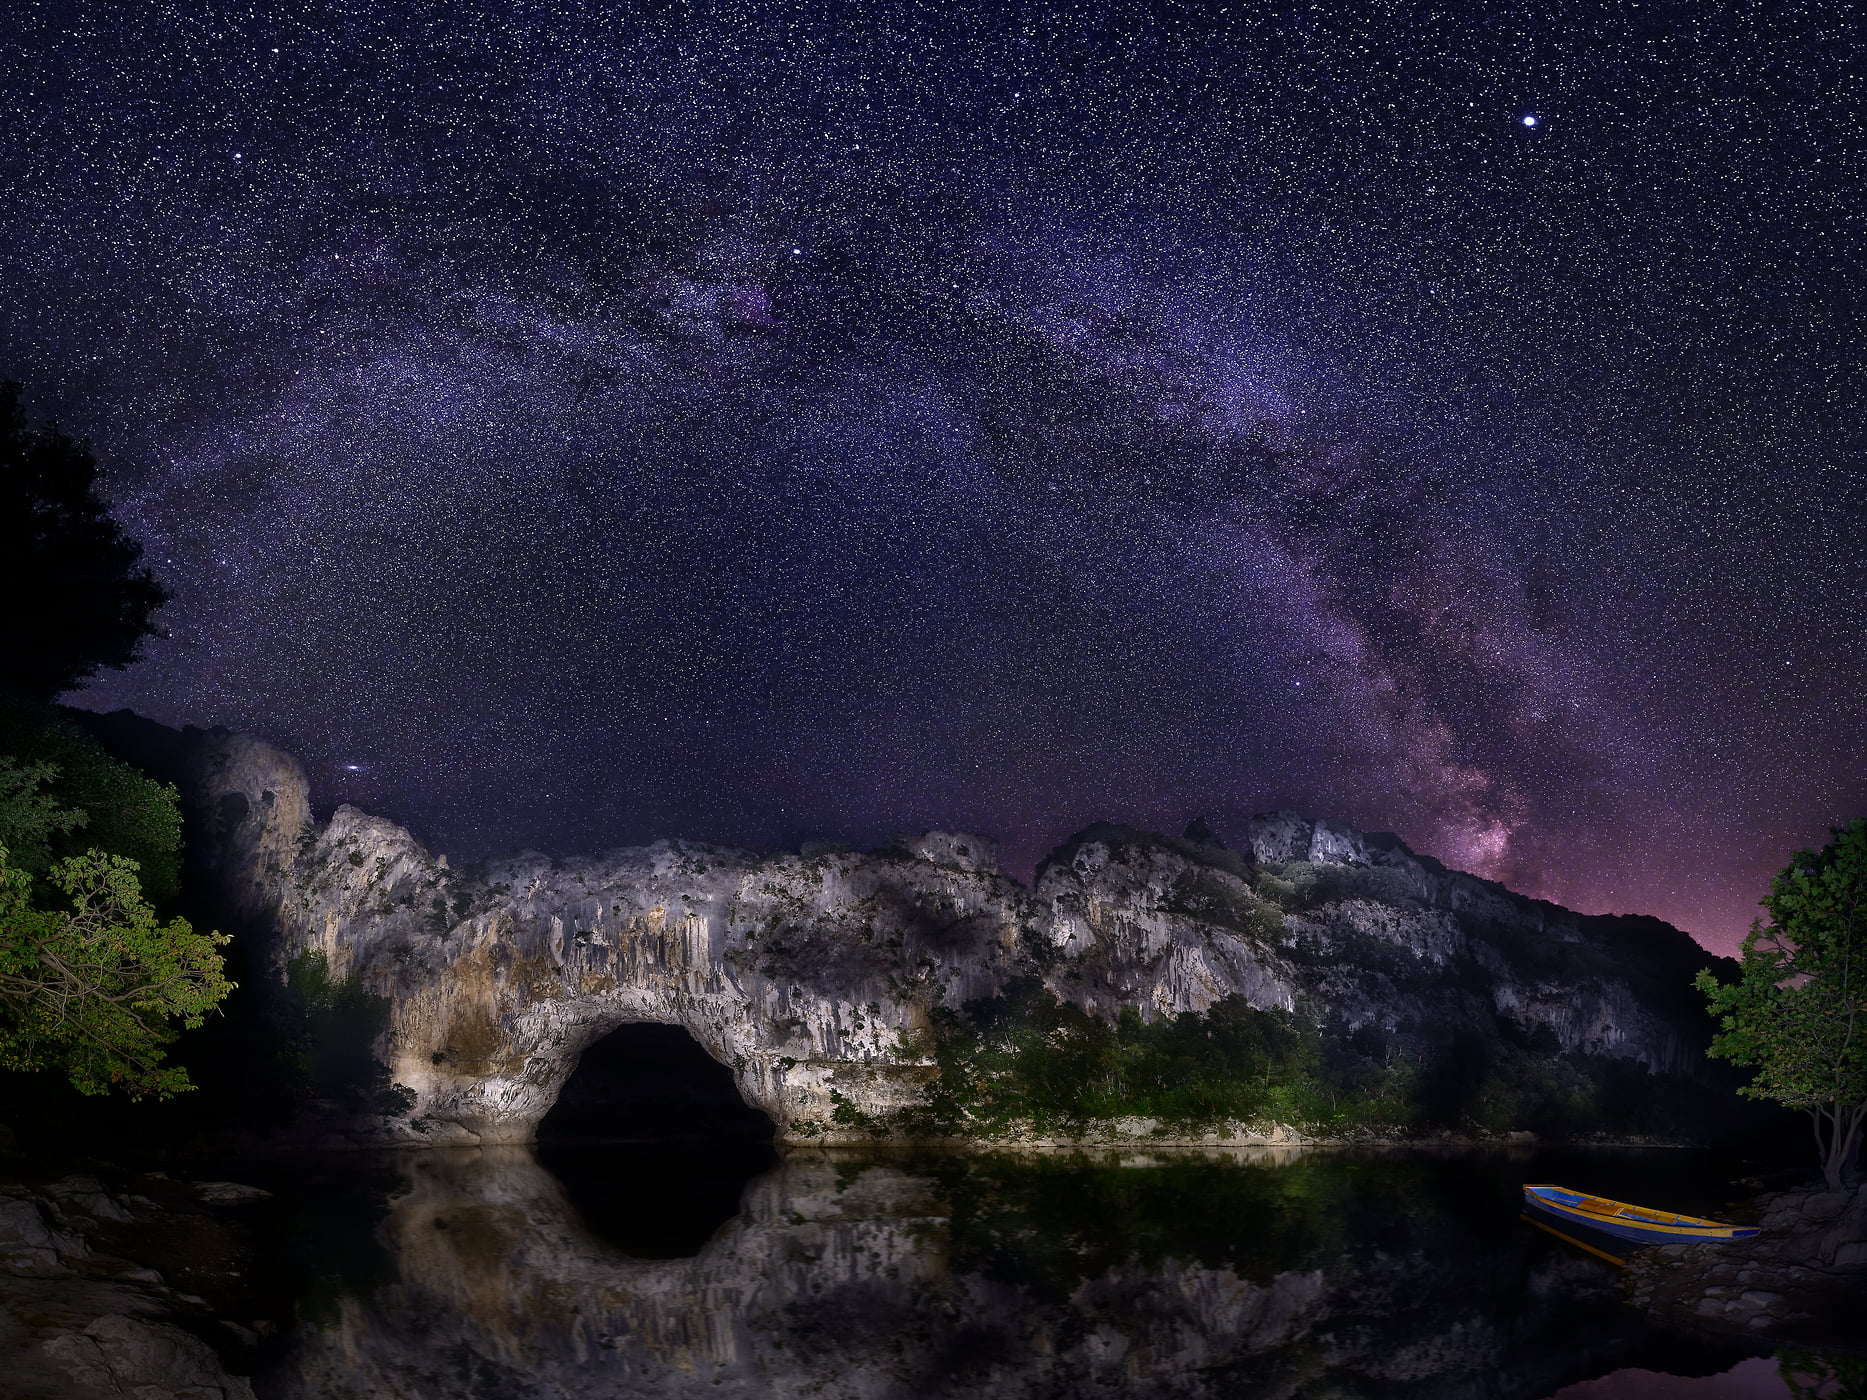 650 megapixels! A very high resolution, large-format VAST photo print of the night sky and Milky Way above a lake and cave; astrophotograph created by David Meaux in Pont d'Arc, Vallon-Pont-d'Arc, Ardèche, France